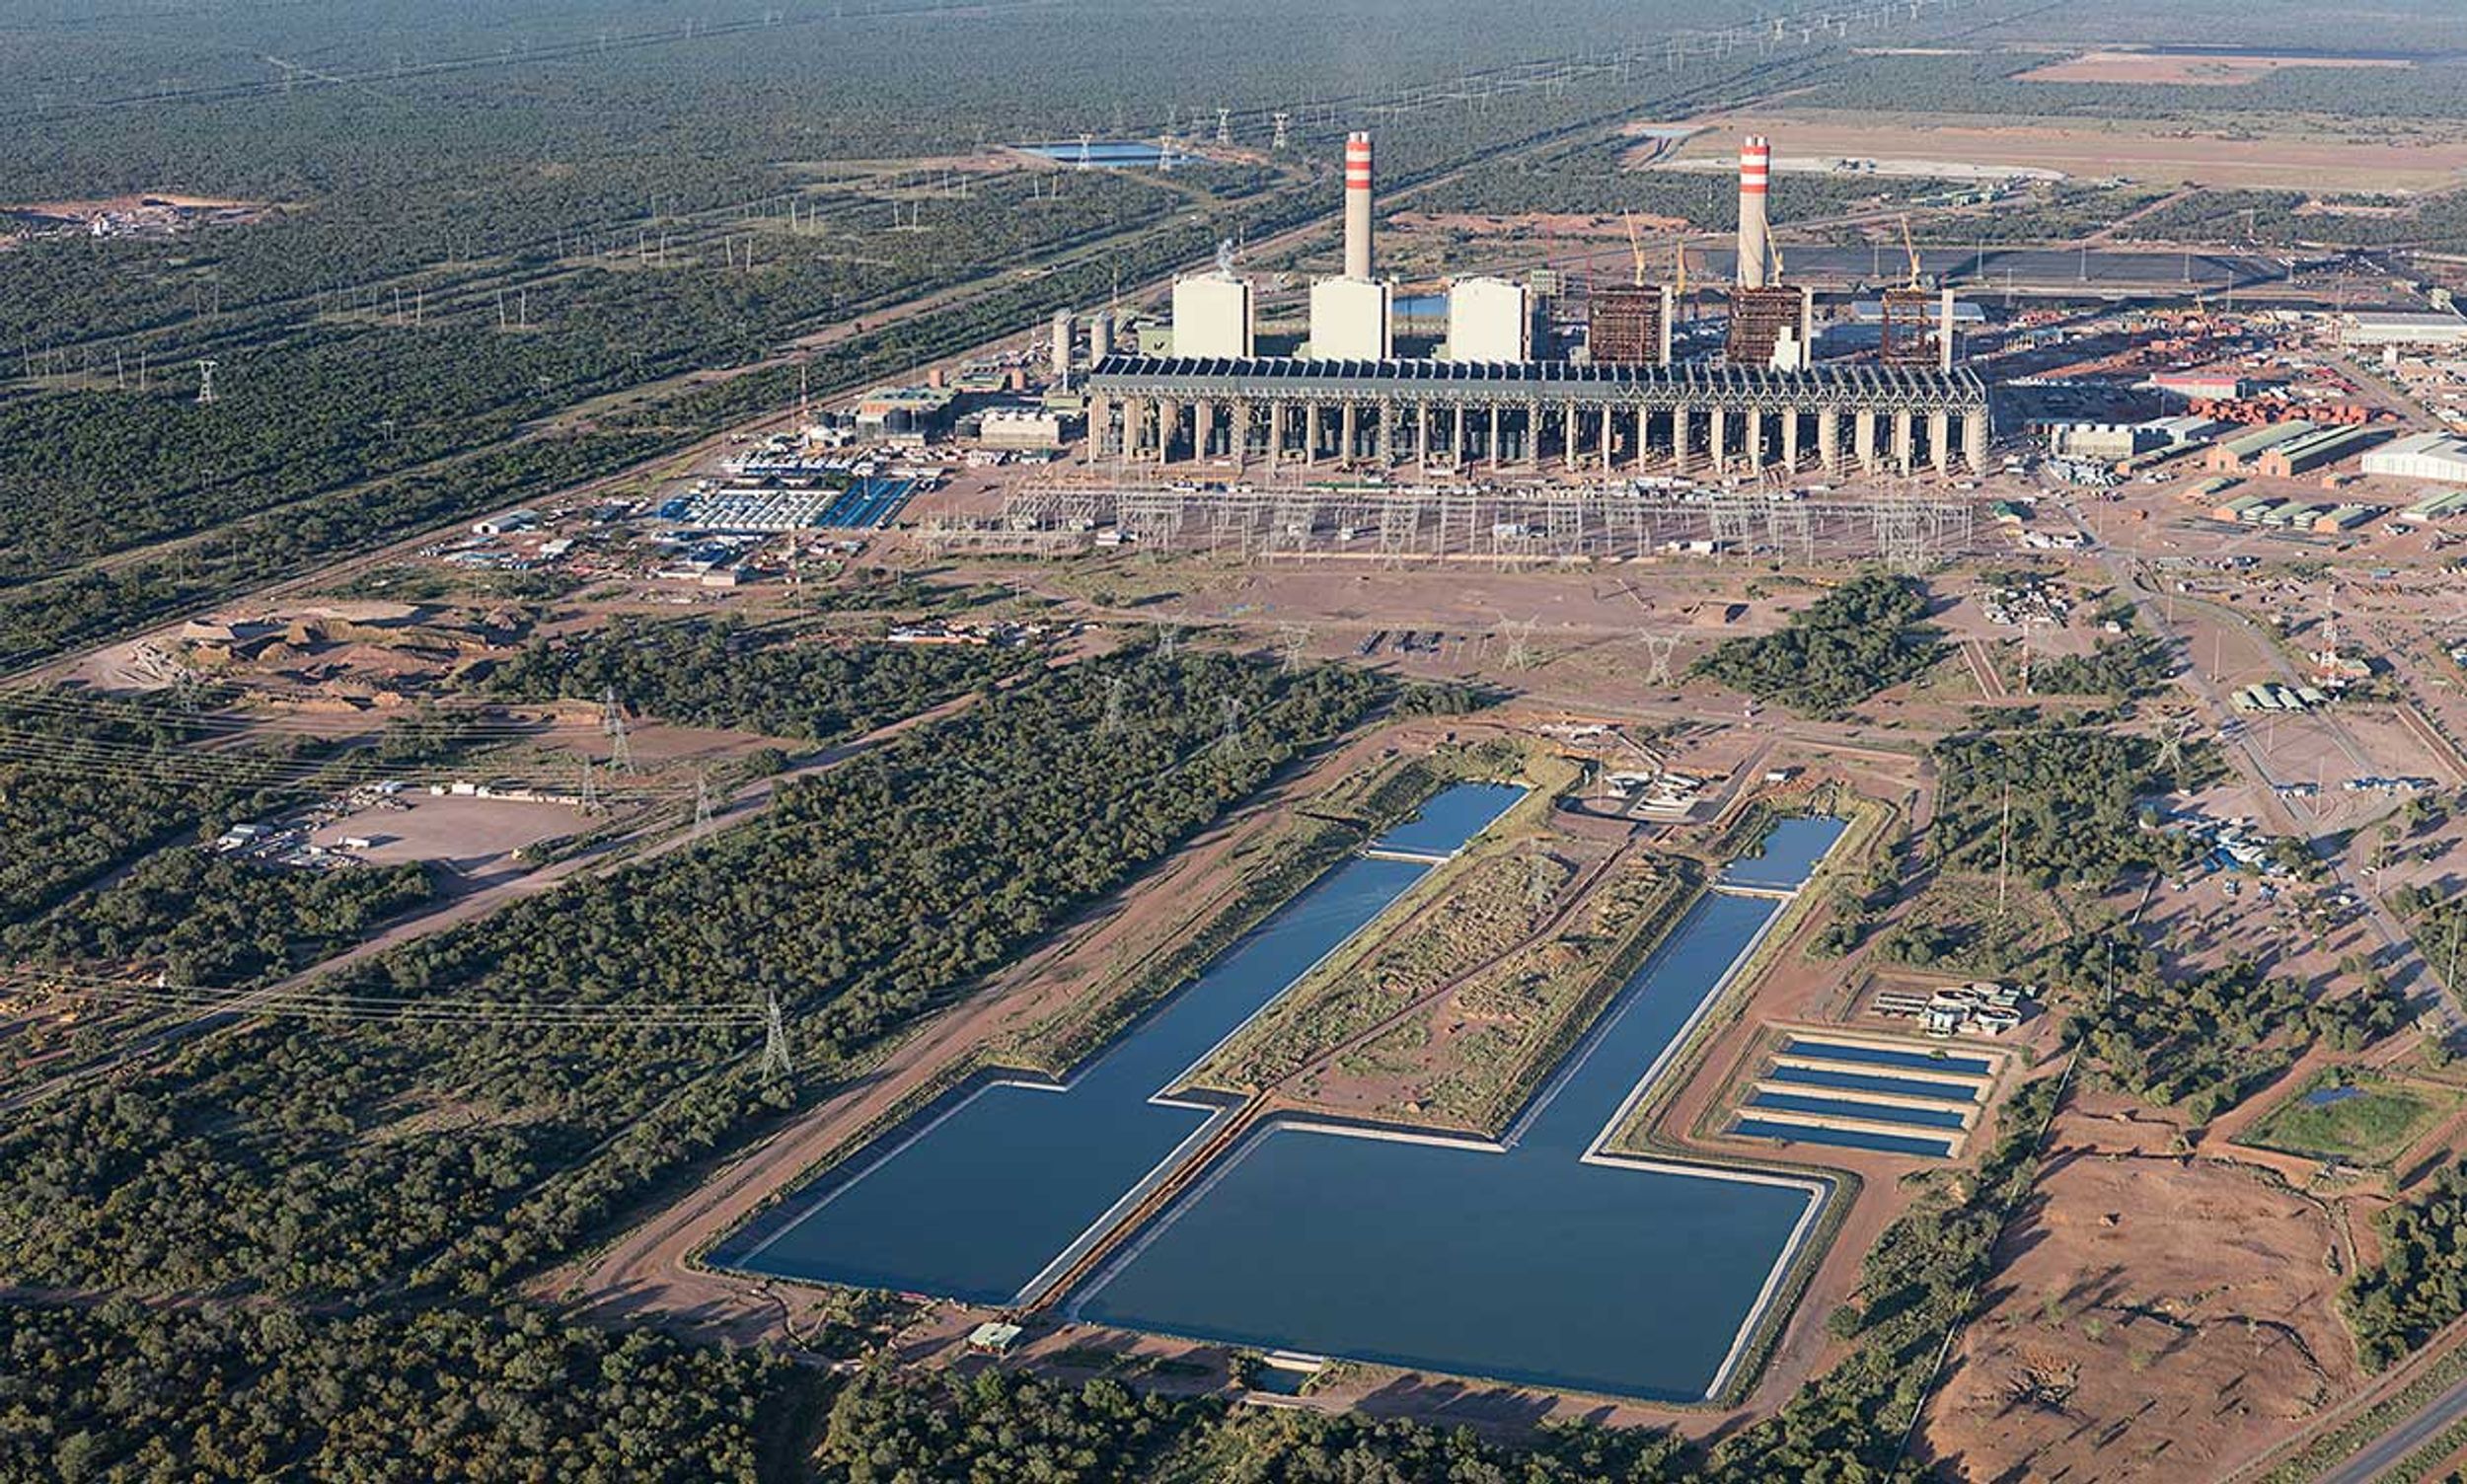 arial shot of the contentious Medupi power station in South Africa.